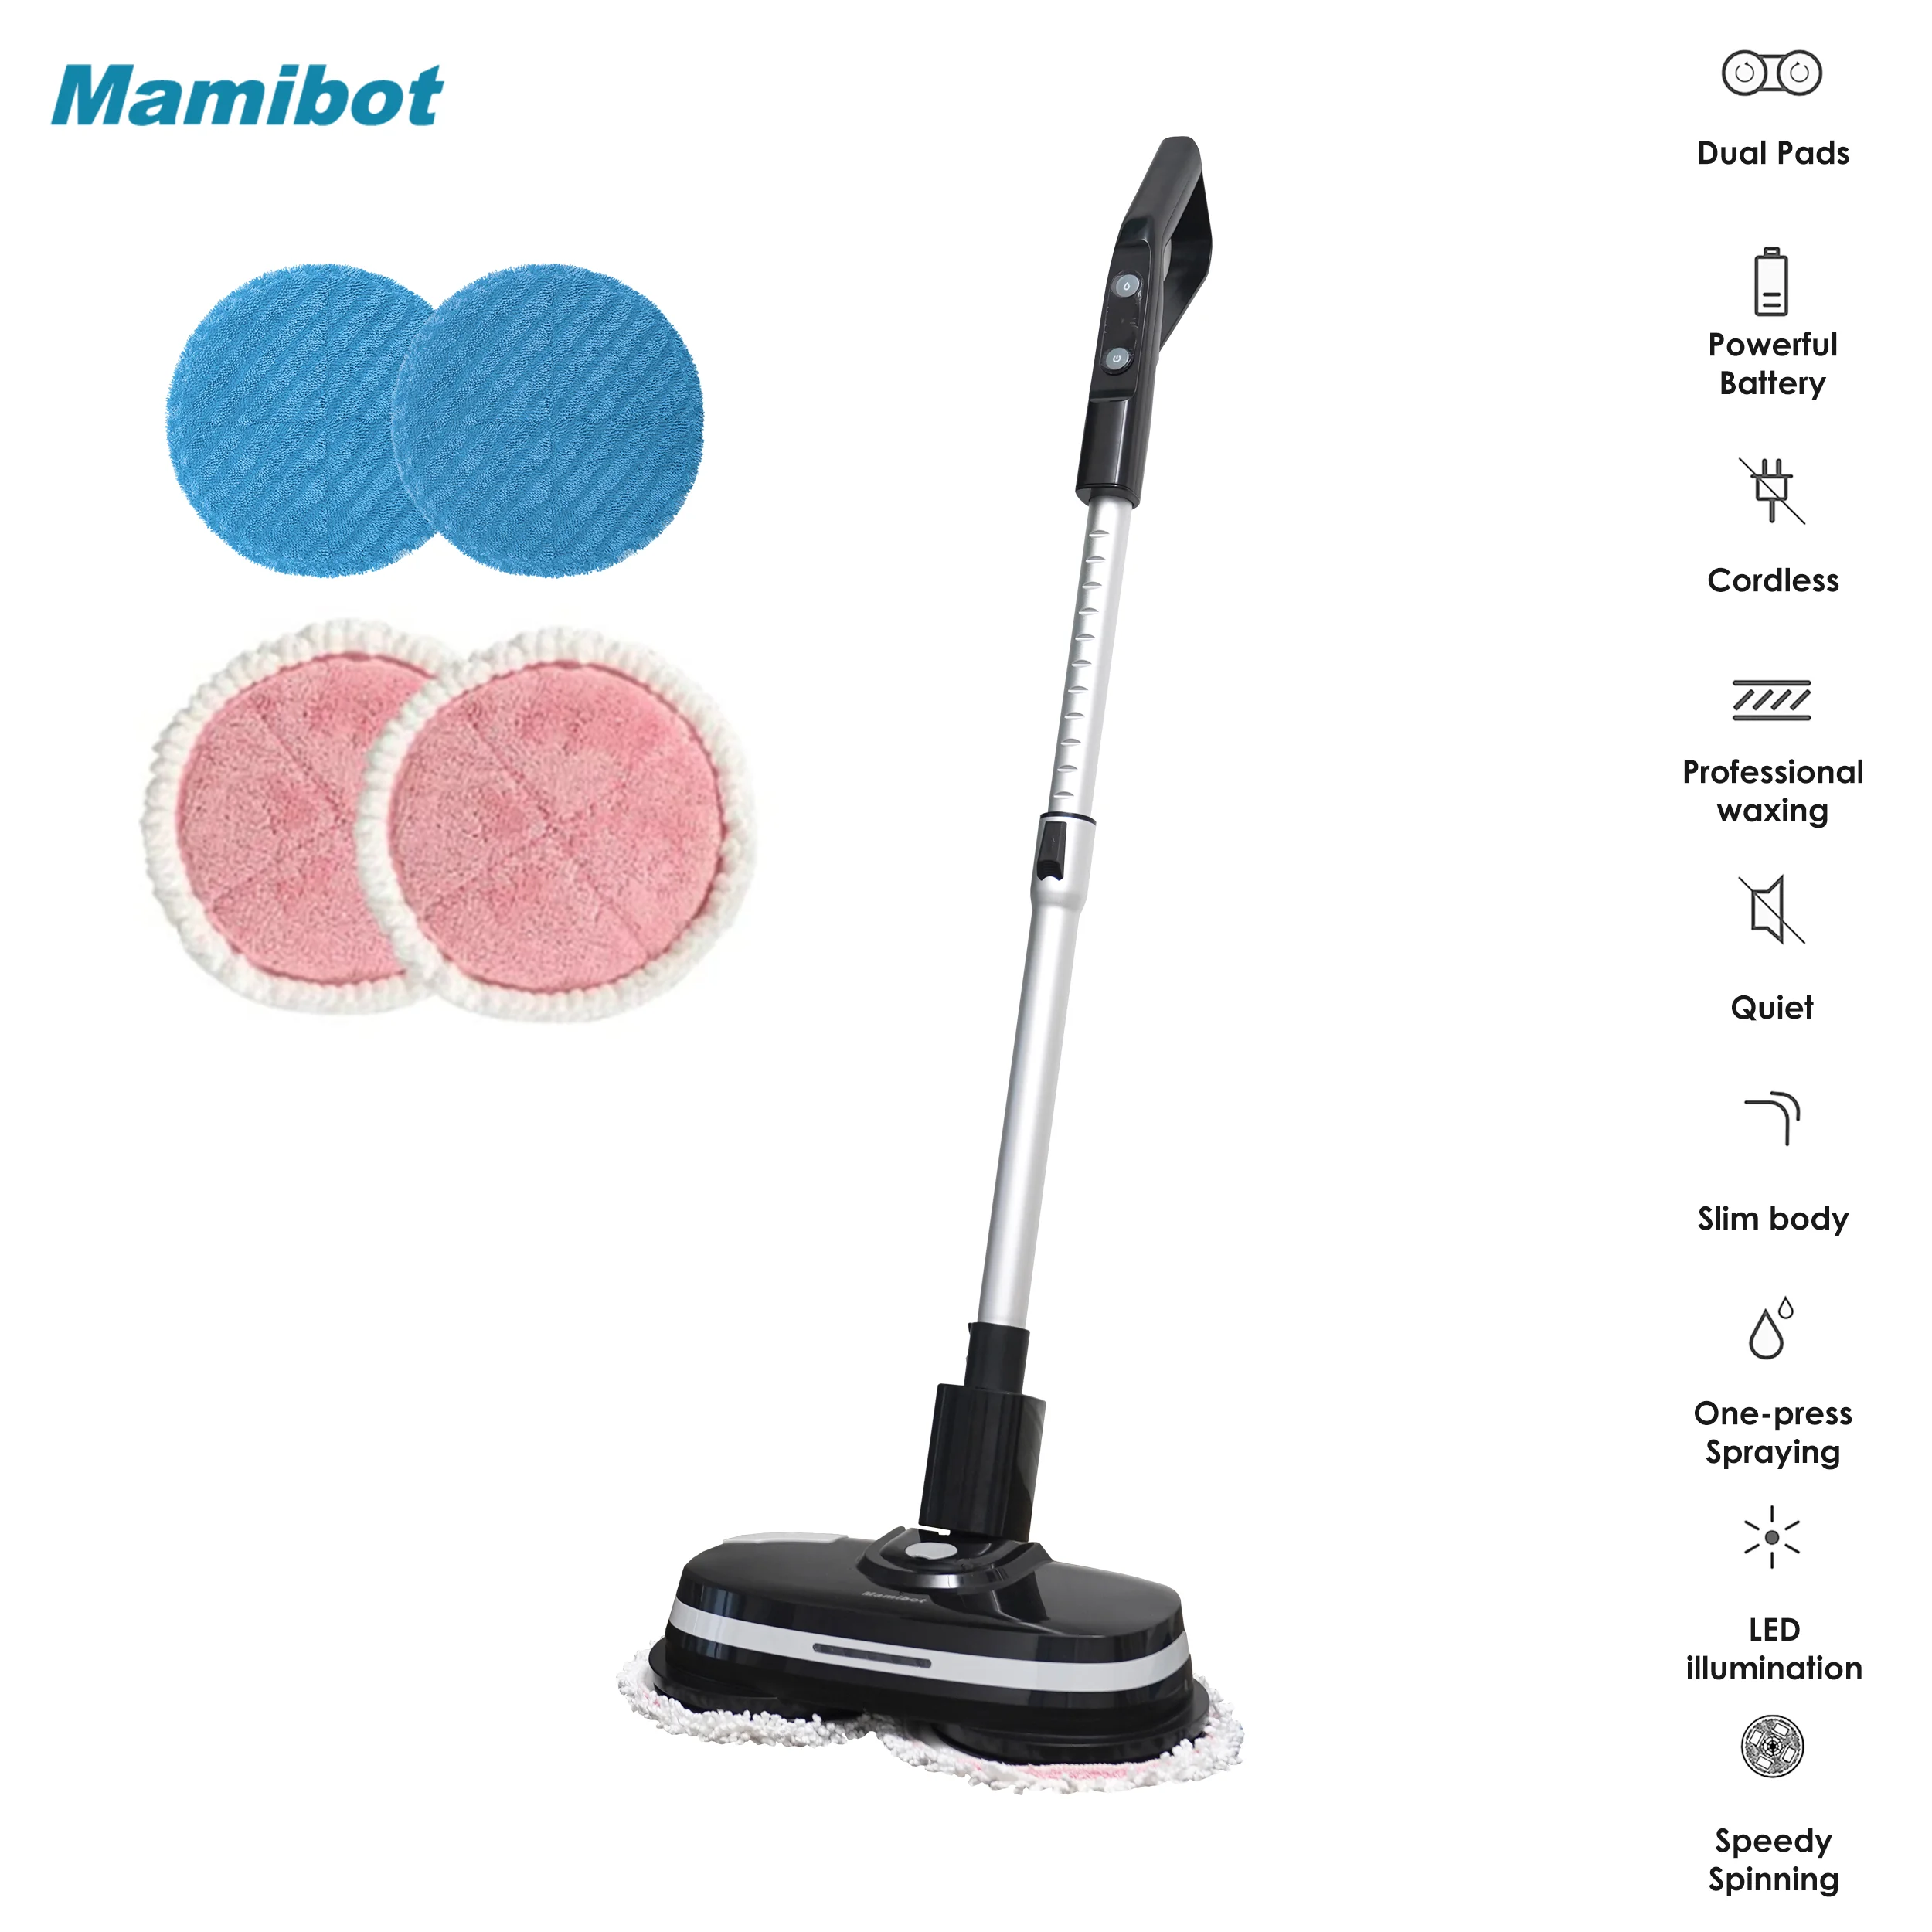 2020 Mamibot Multifunction cordless electric mop with dual pads,electric room waxer, mop, polisher and scrubber